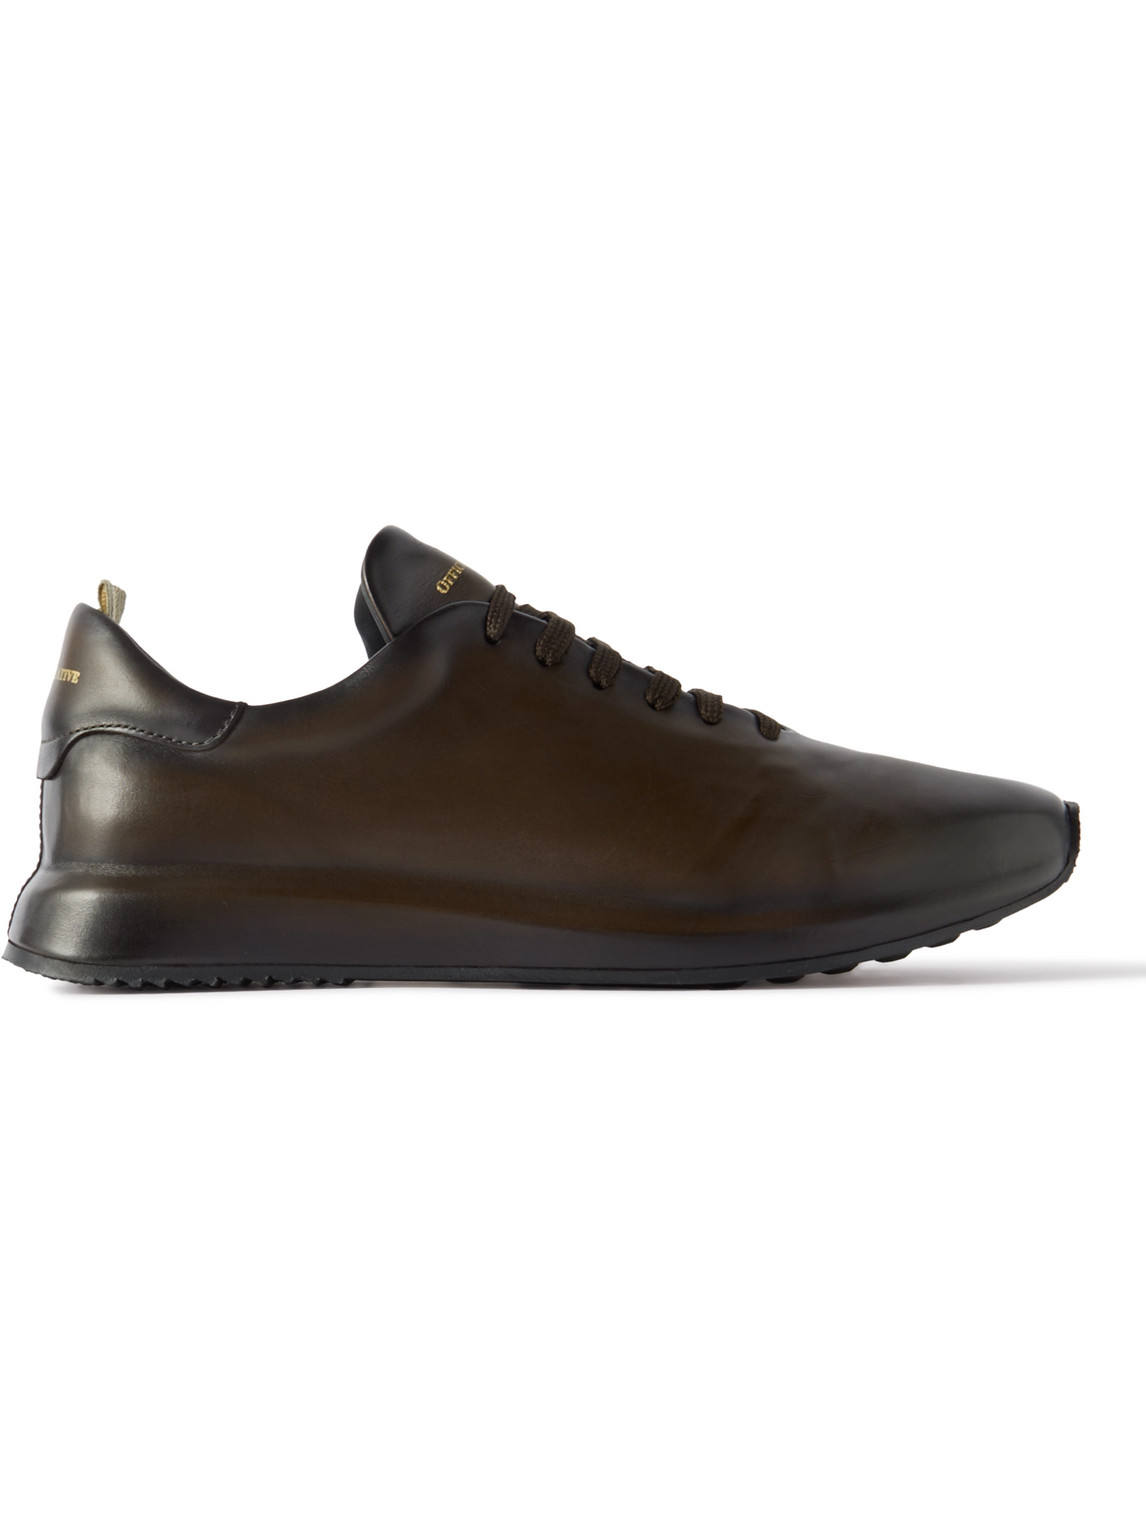 OFFICINE CREATIVE RACE 017 LEATHER SNEAKERS